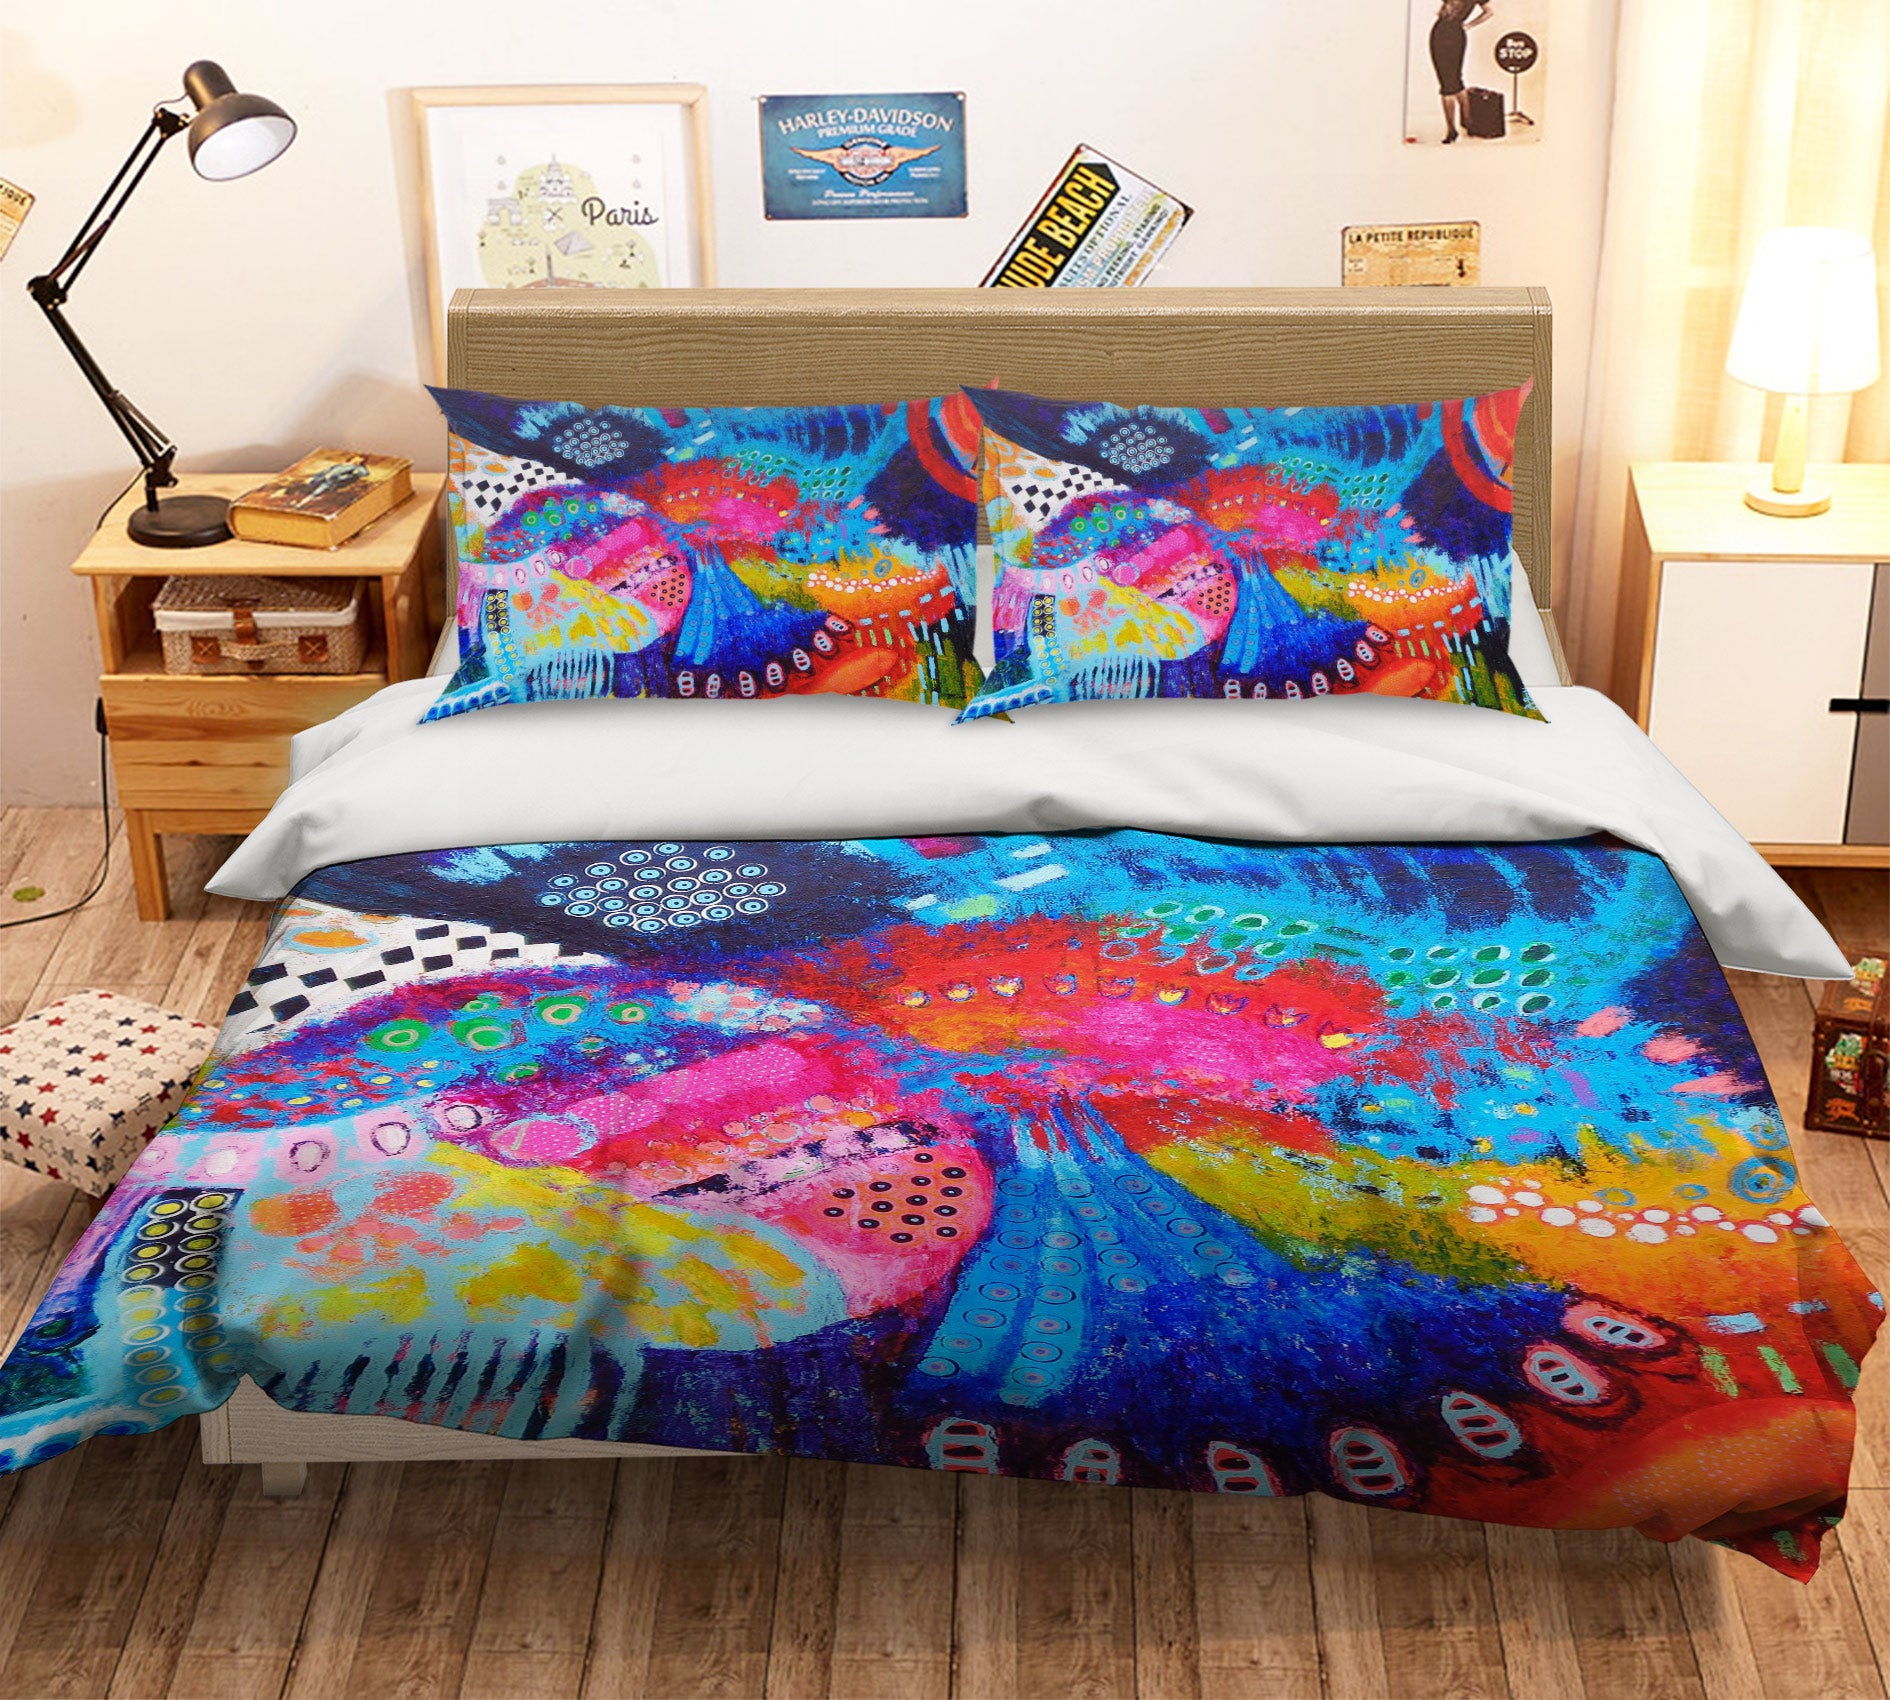 3D Painted Painting 1166 Misako Chida Bedding Bed Pillowcases Quilt Cover Duvet Cover